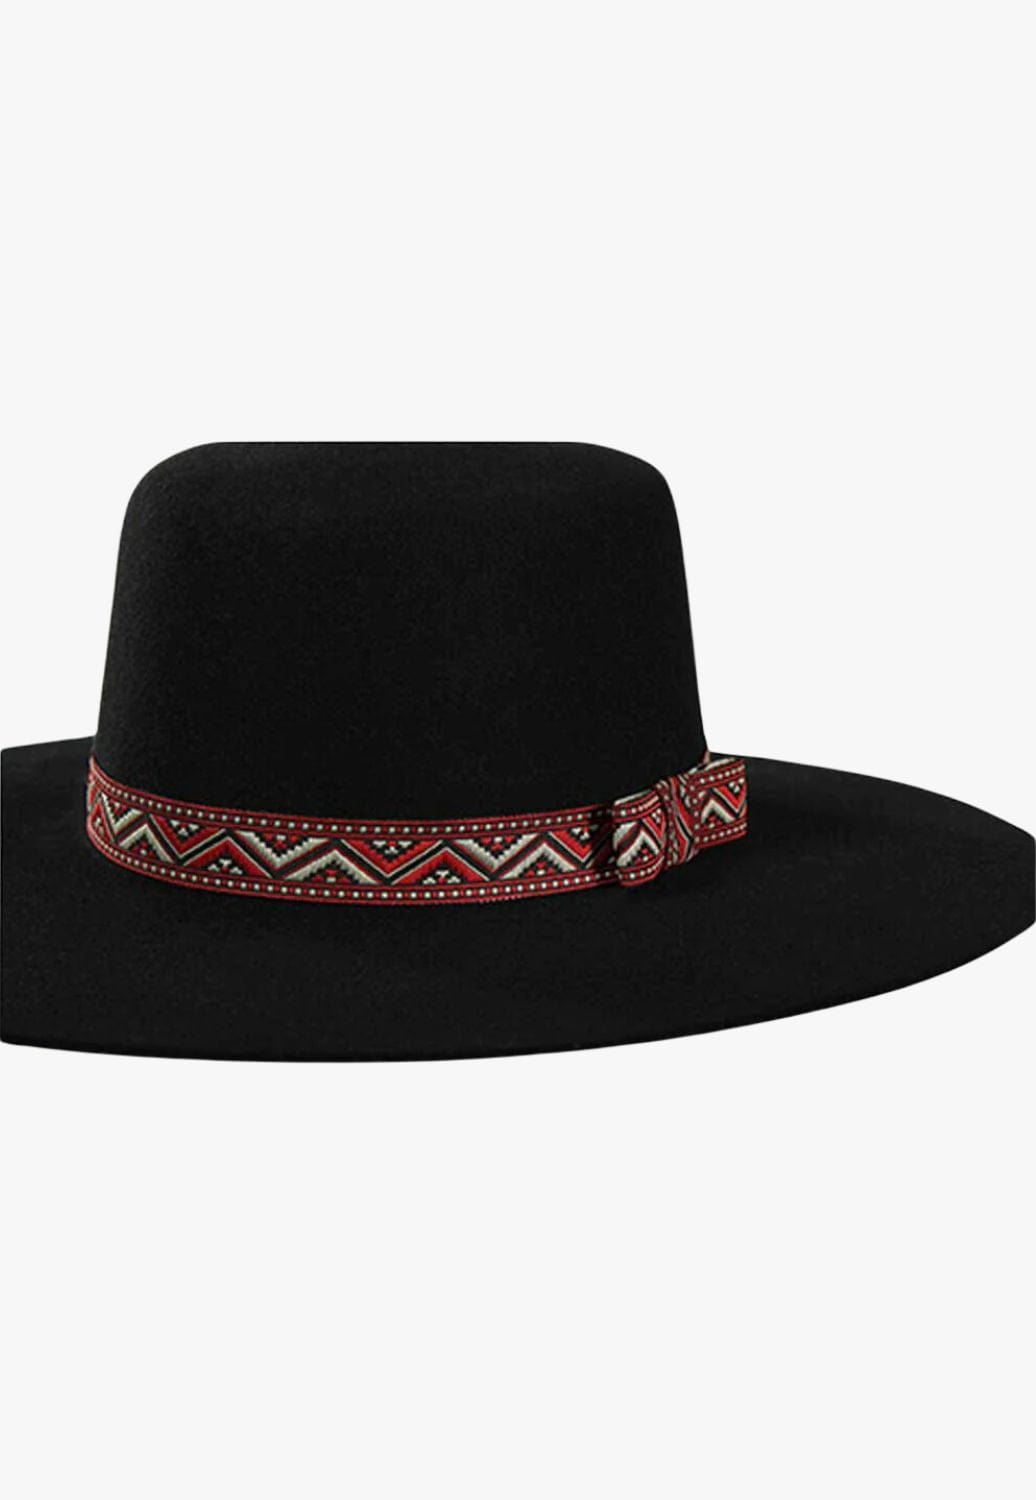 Twister ACCESSORIES-Hat Bands Red Twister Triangle Pattern Stretch Hatband